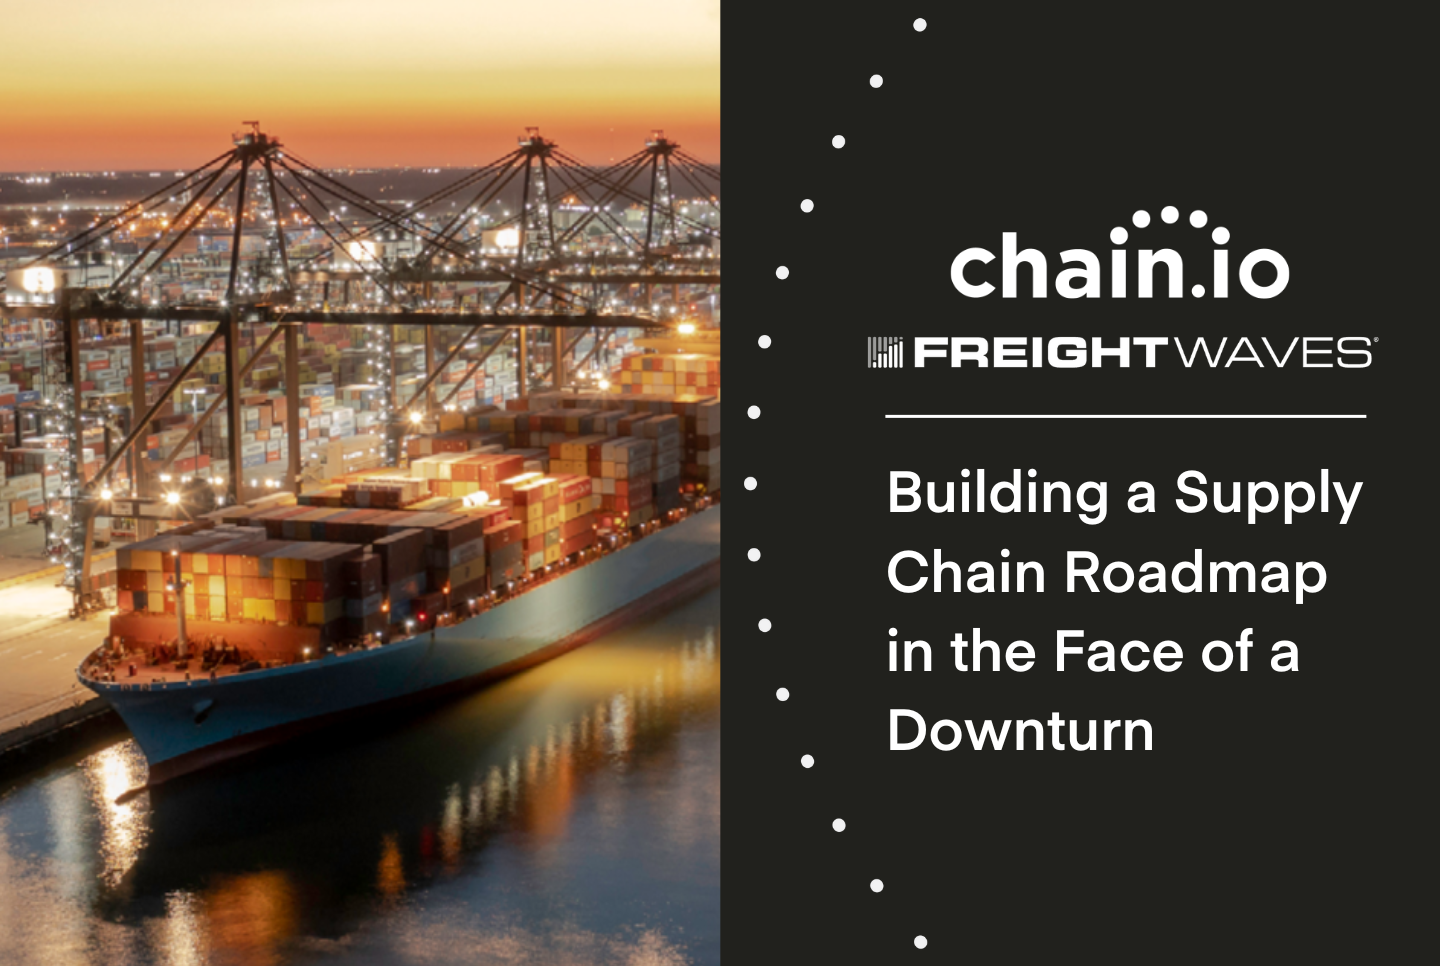 Despite the forecasted economic downturn, freight forwarders are still prioritizing significant investments in tech.